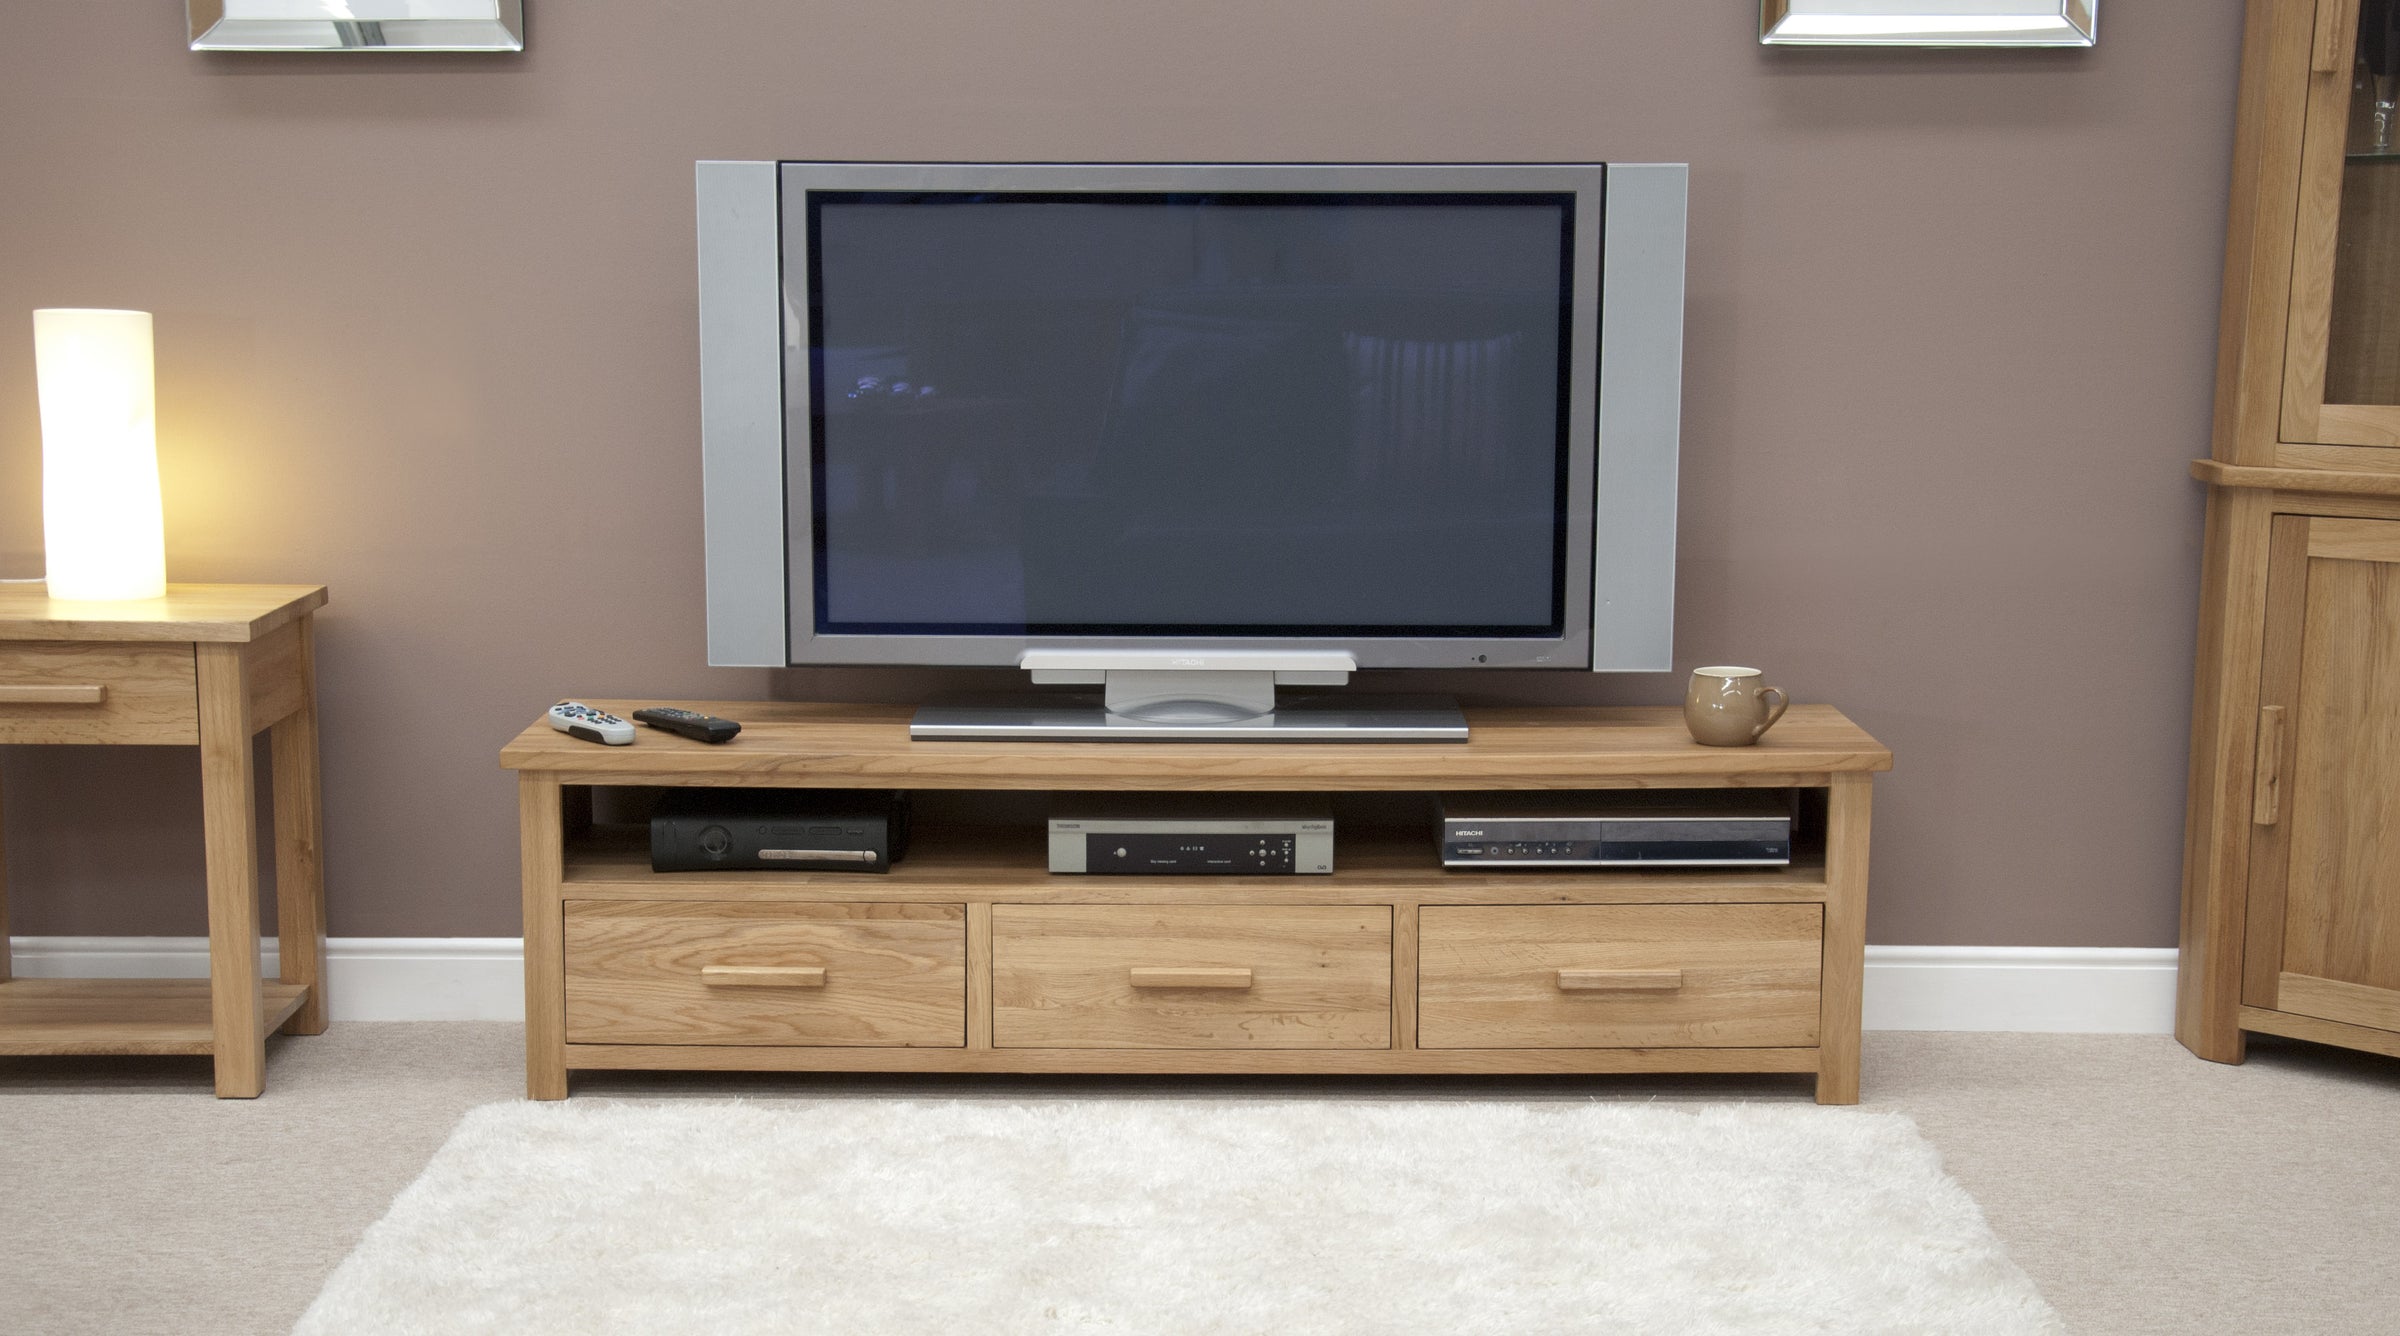 Plasma TV Cabinets from Top Secret Furniture, Holmes Chapel, Cheshire CW4 8AF